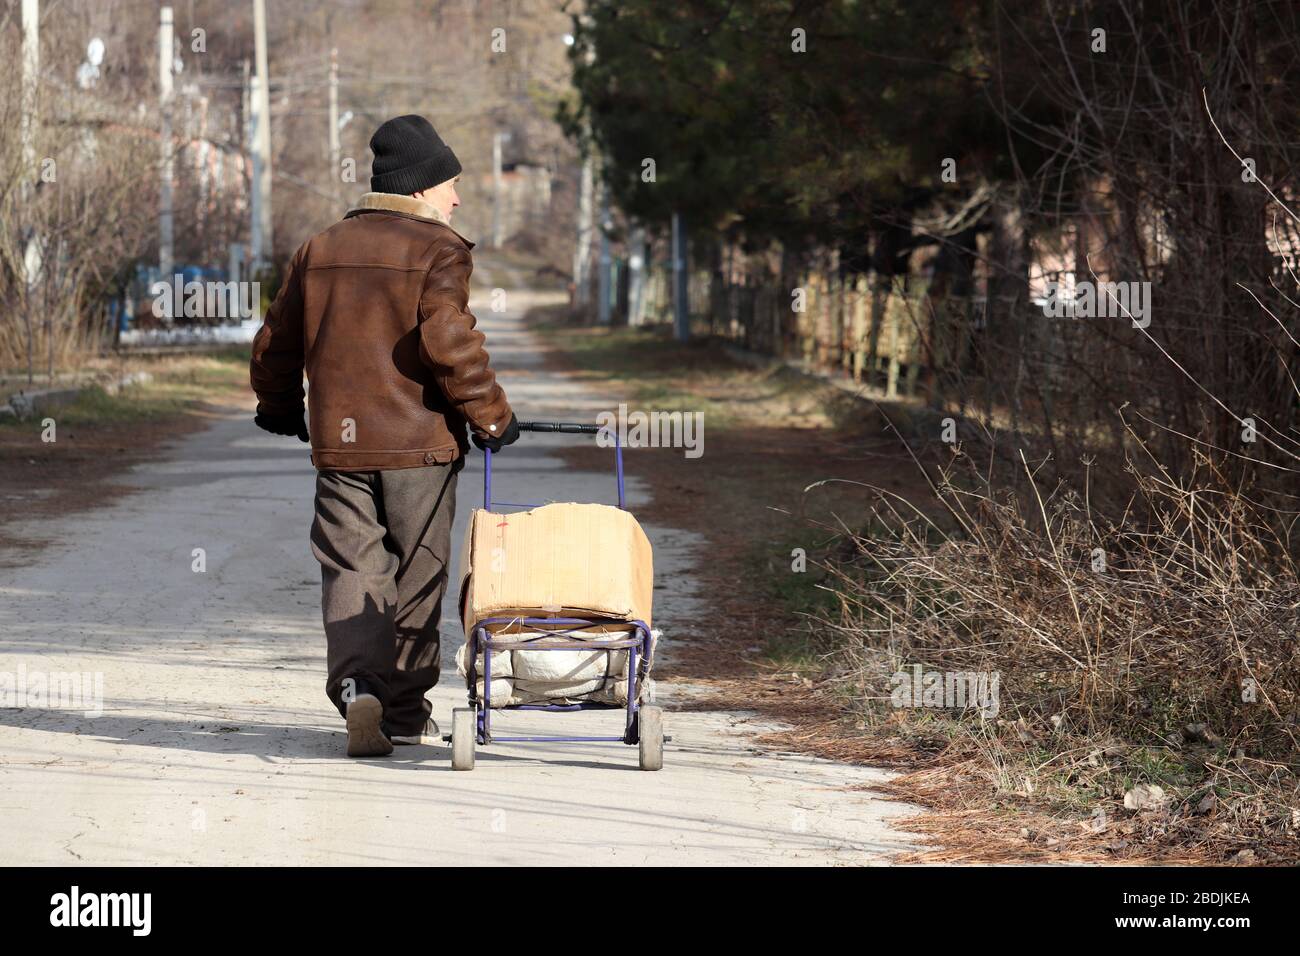 Elderly man walking on rural street with handcart, life in village. Retired person is stocking up on food during the quarantine of coronavirus Stock Photo